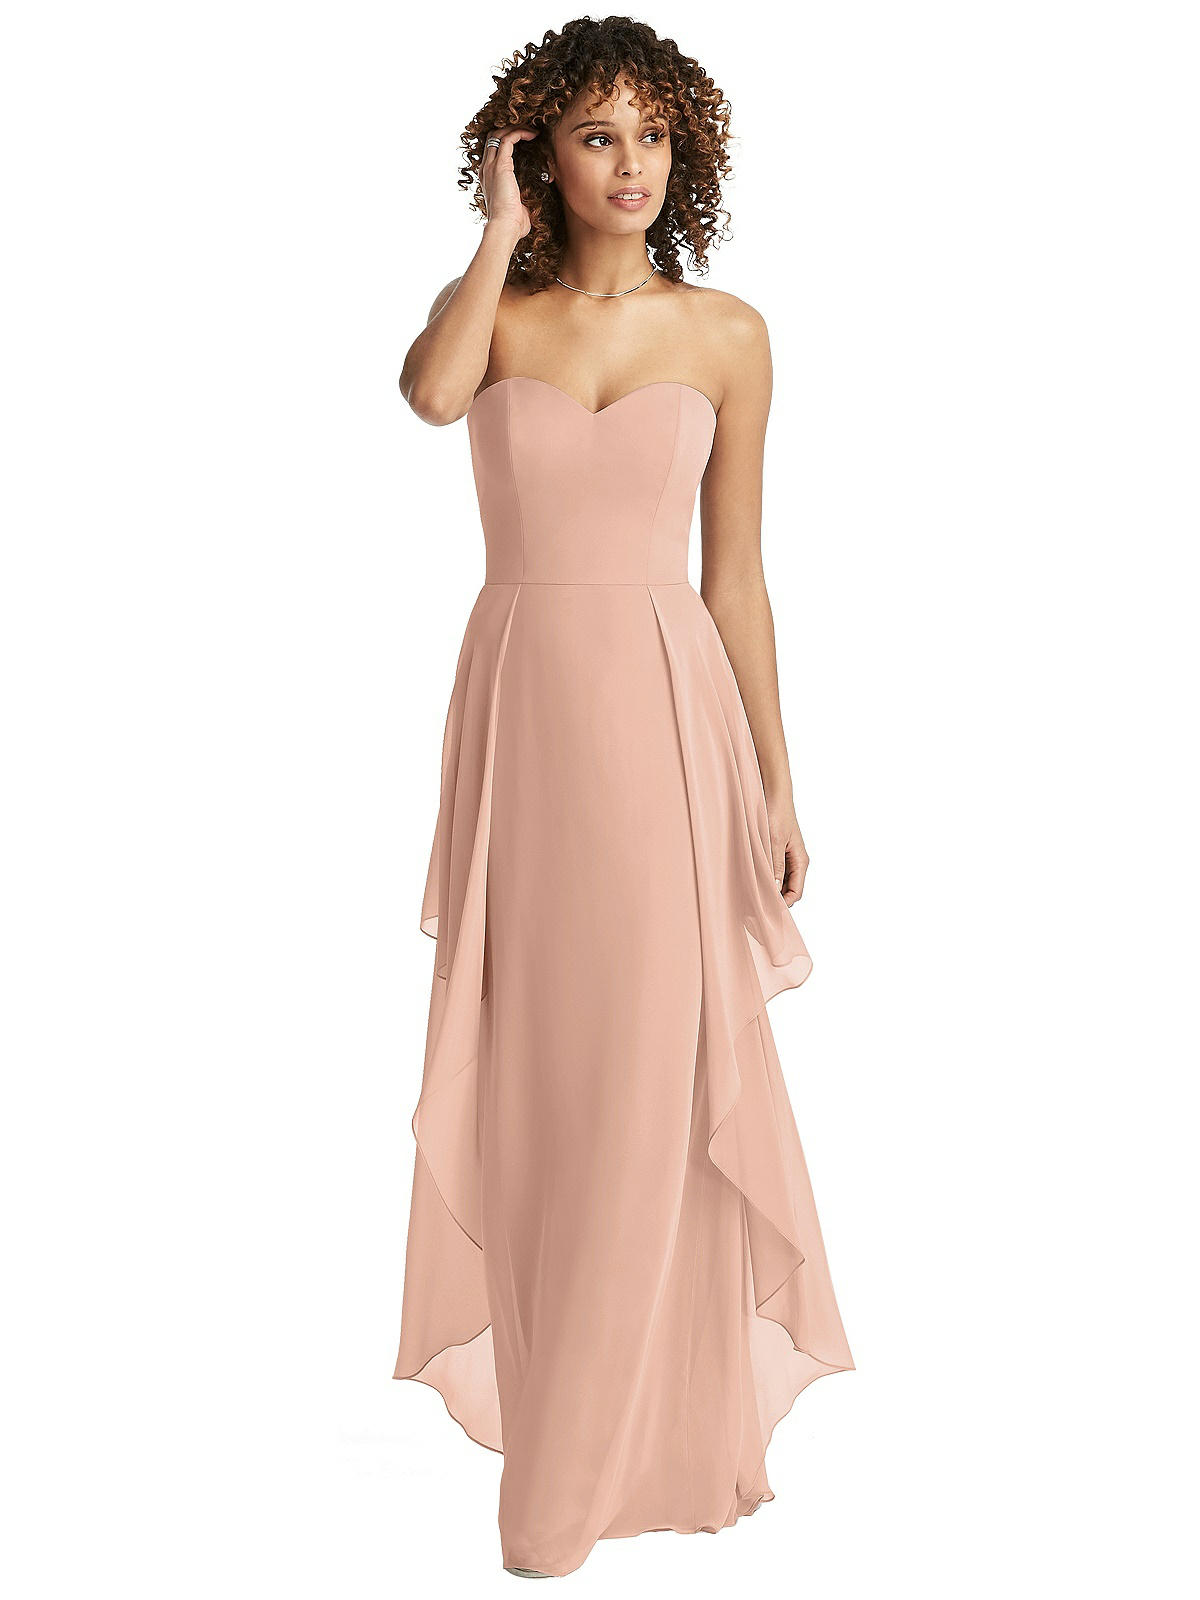 Strapless Overlay Bodice Crepe Maxi Bridesmaid Dress With Front